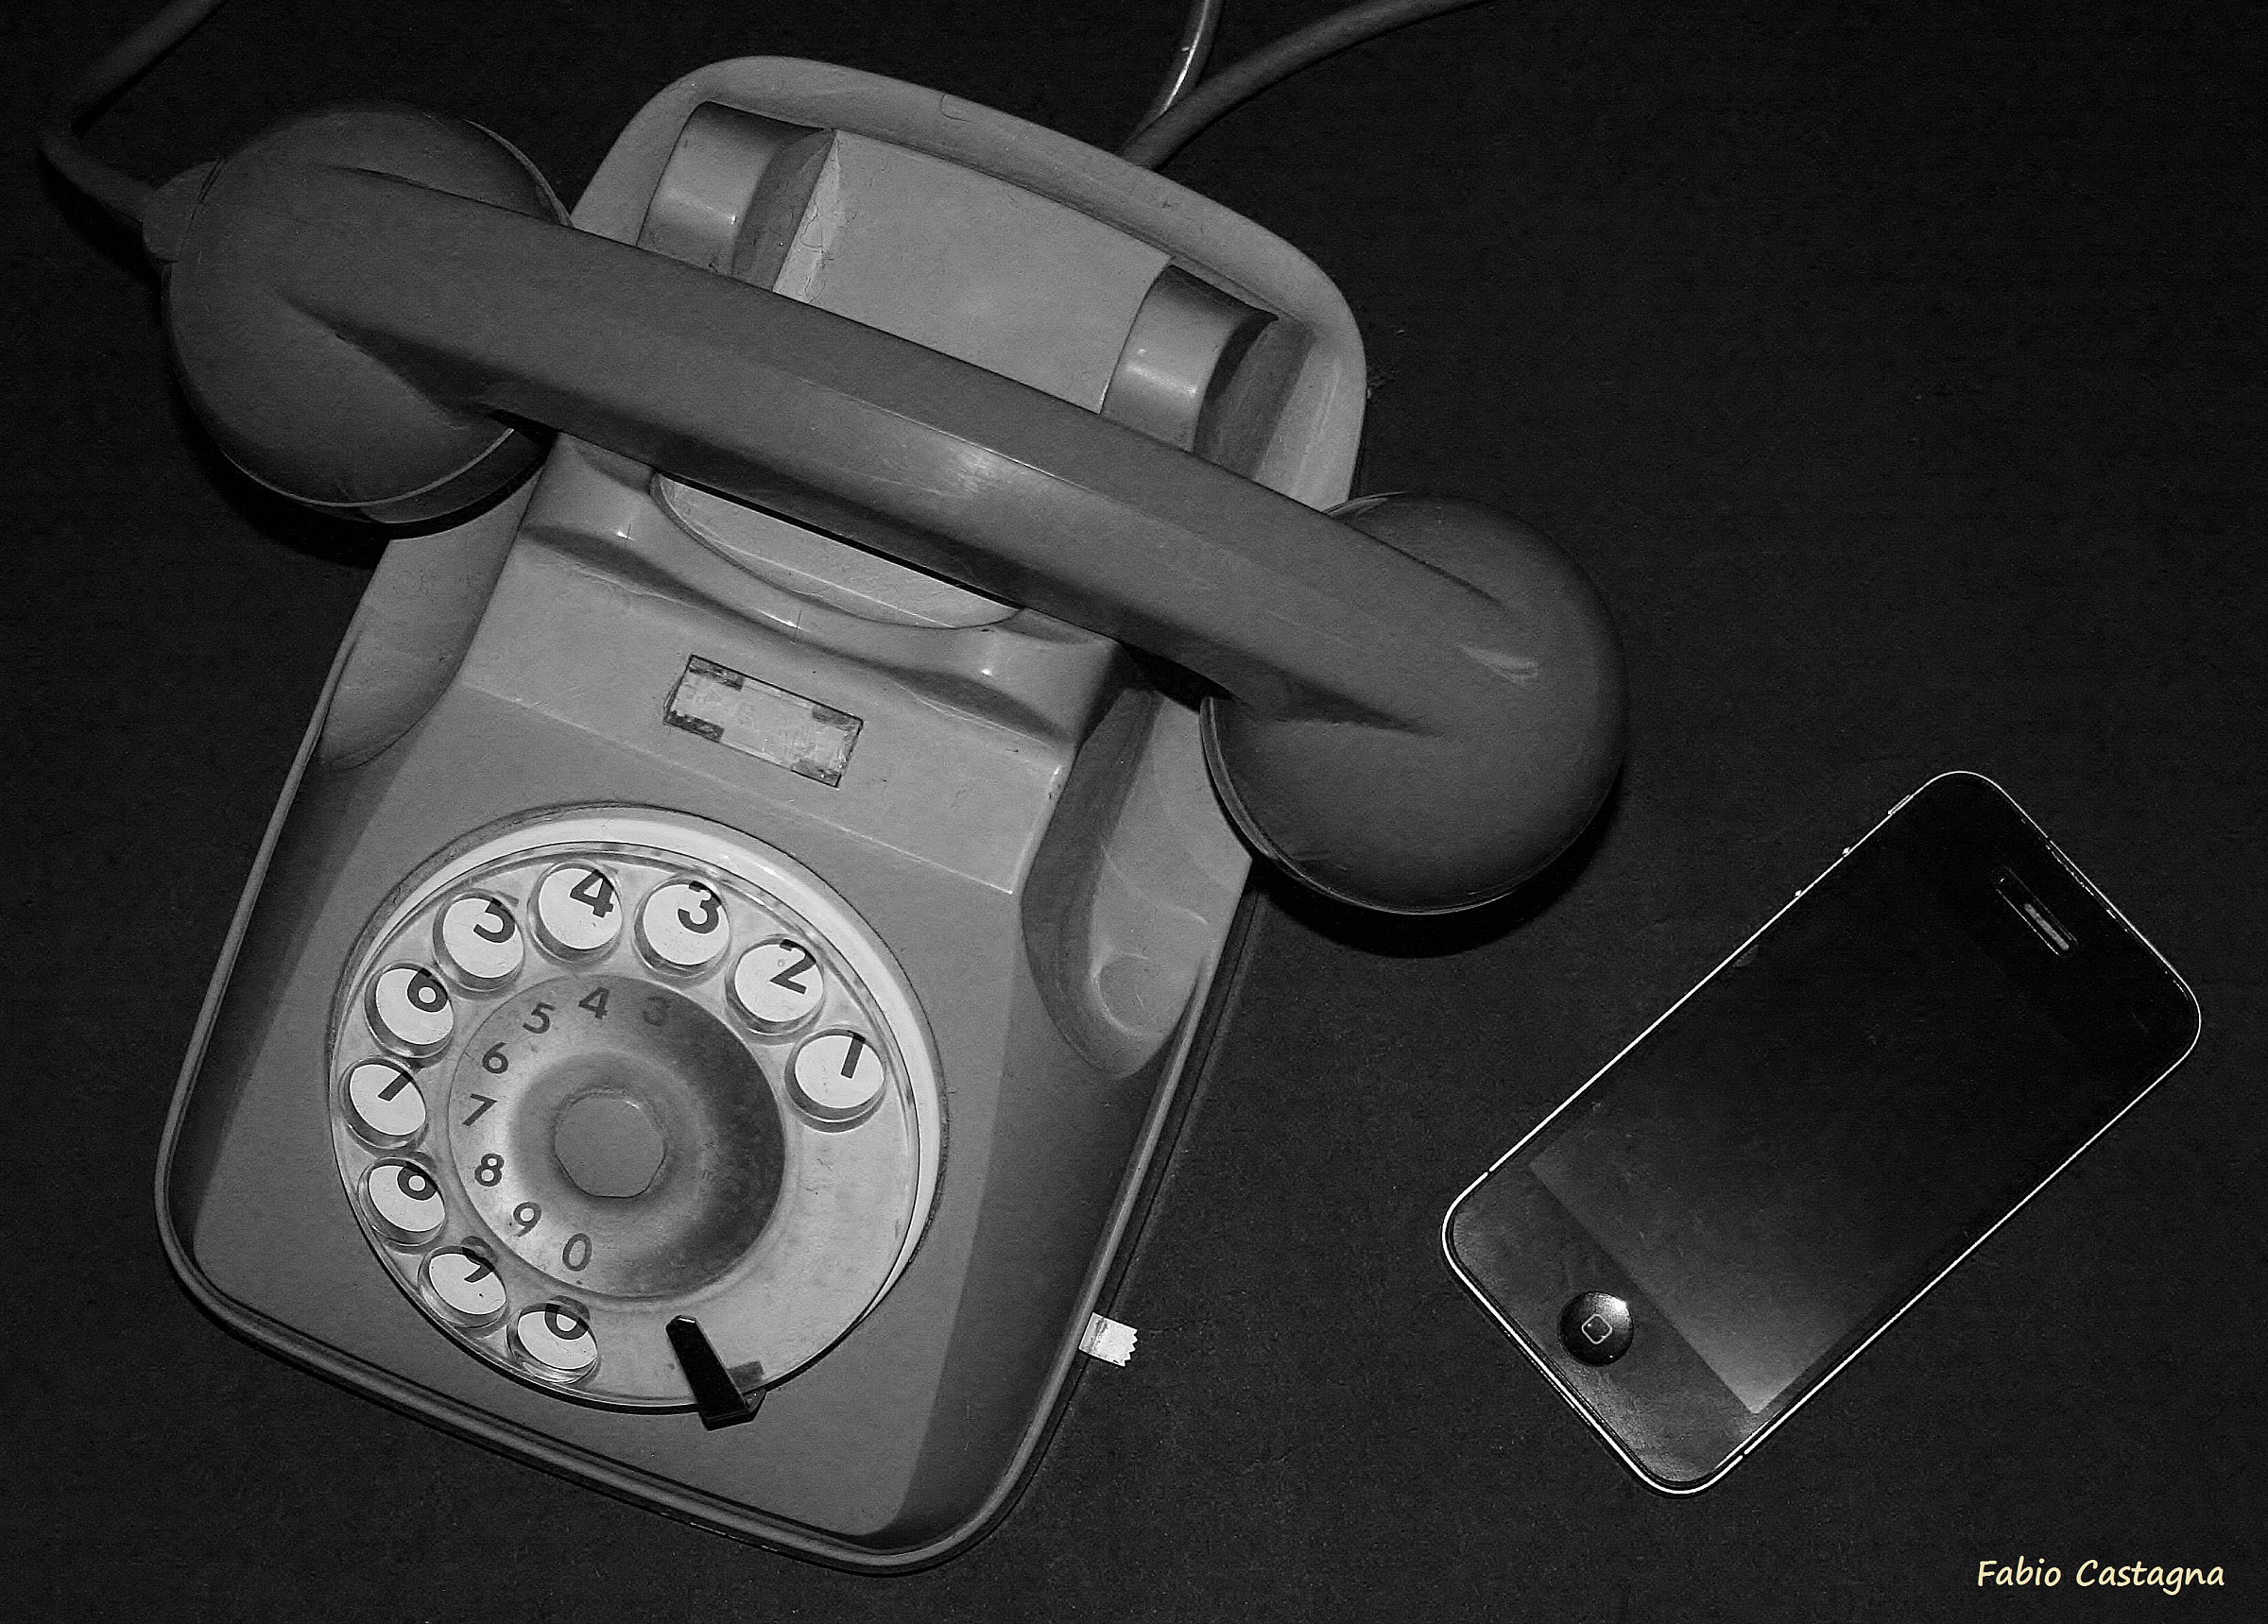 The phone...The past and the future...